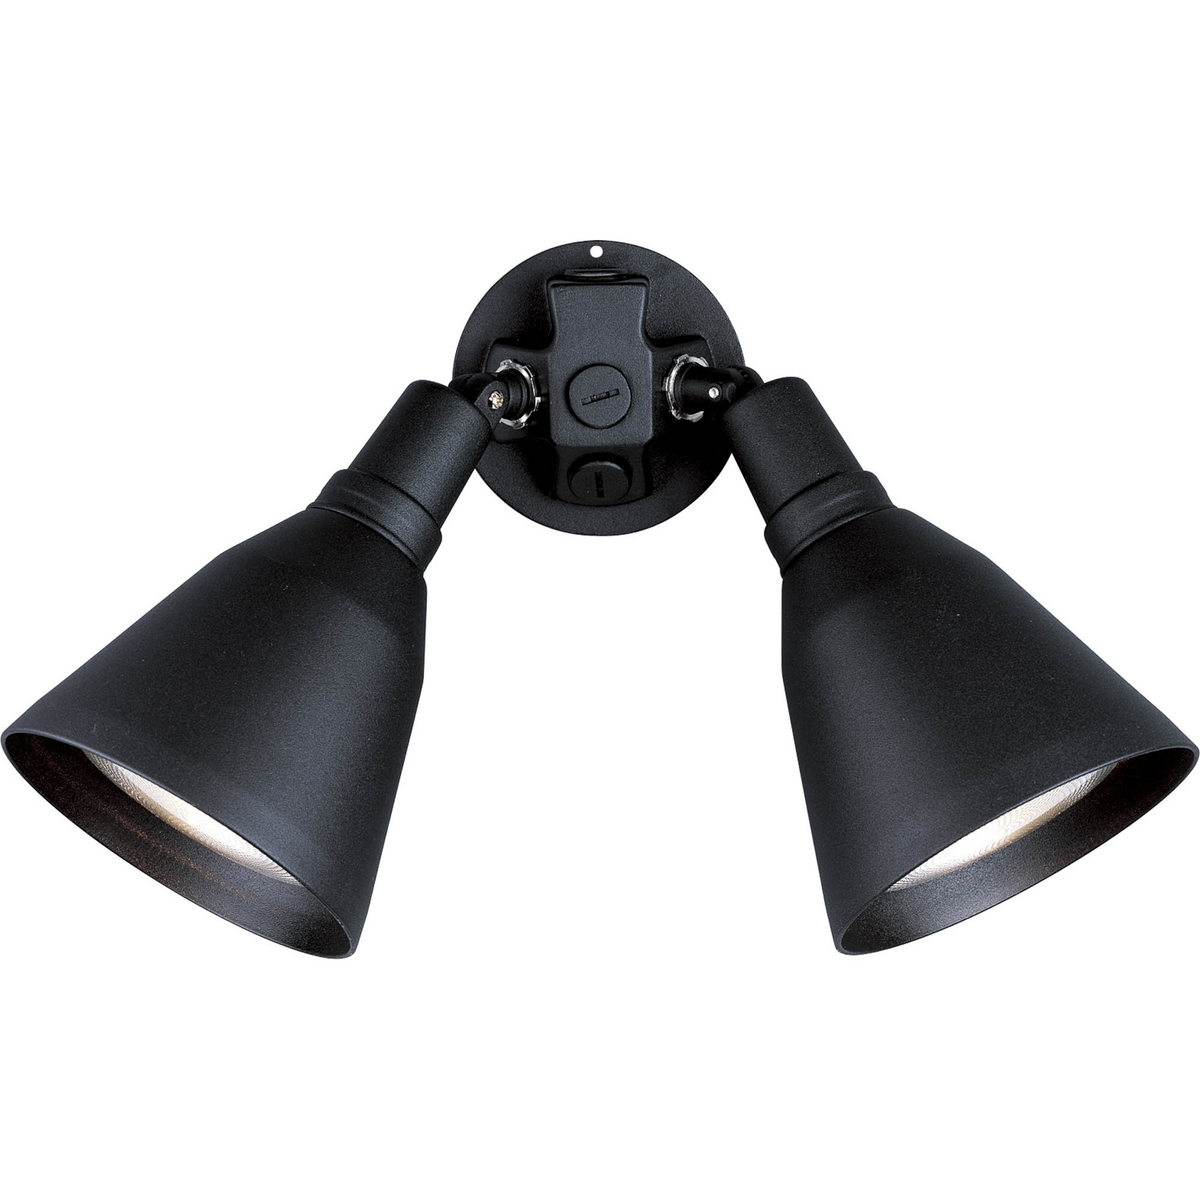 Outdoor adjustable two-headed swivel floodlight in a painted Black finish and solid Aluminum construction.